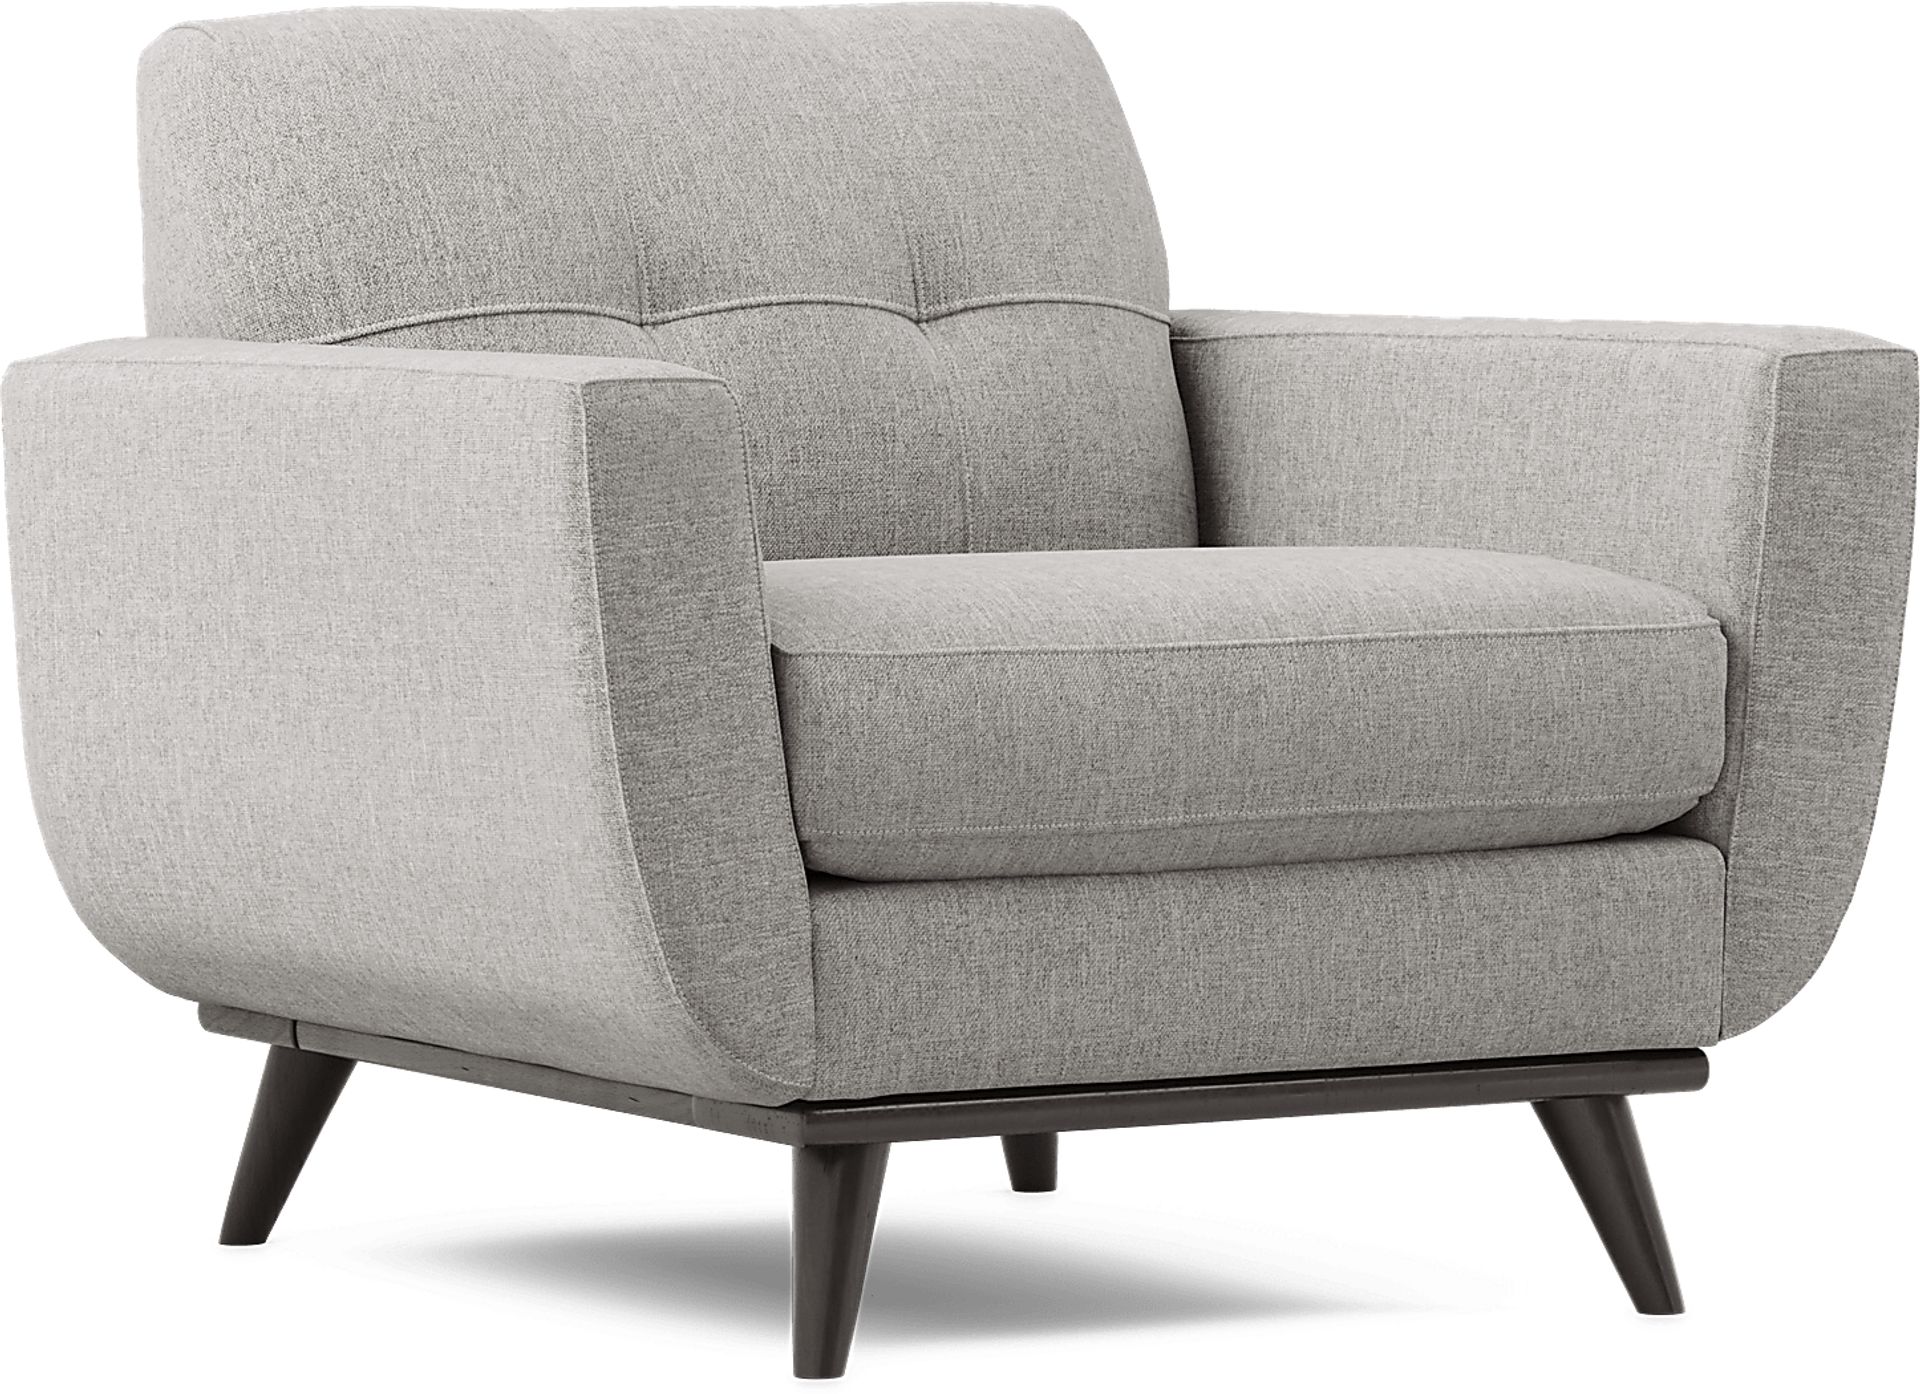 East Side Smoke Gray Polyester Fabric Chair | Rooms to Go